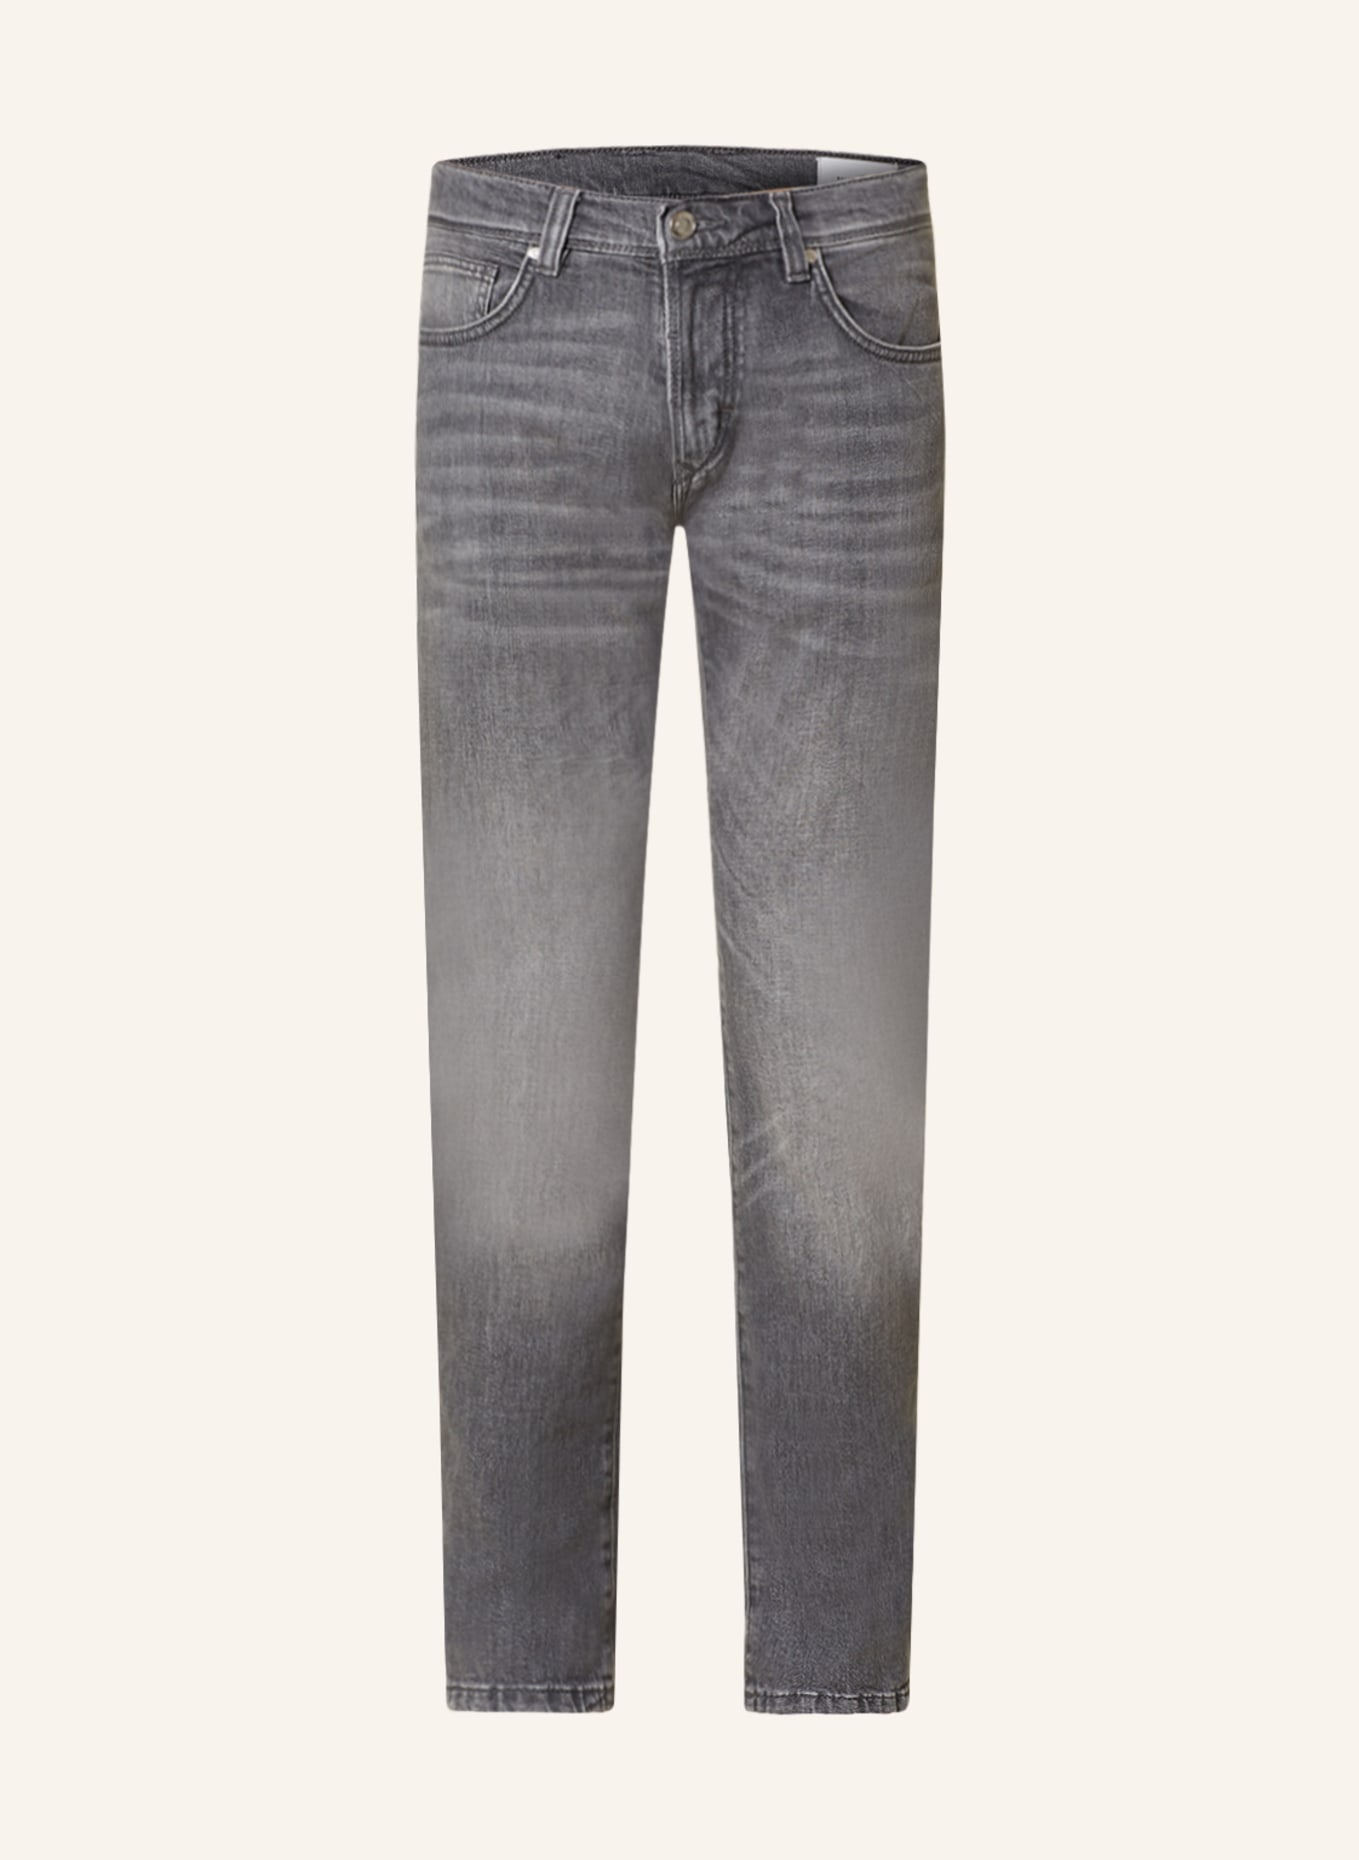 BALDESSARINI Jeans tapered fit, Color: 9834 grey used buffies (Image 1)